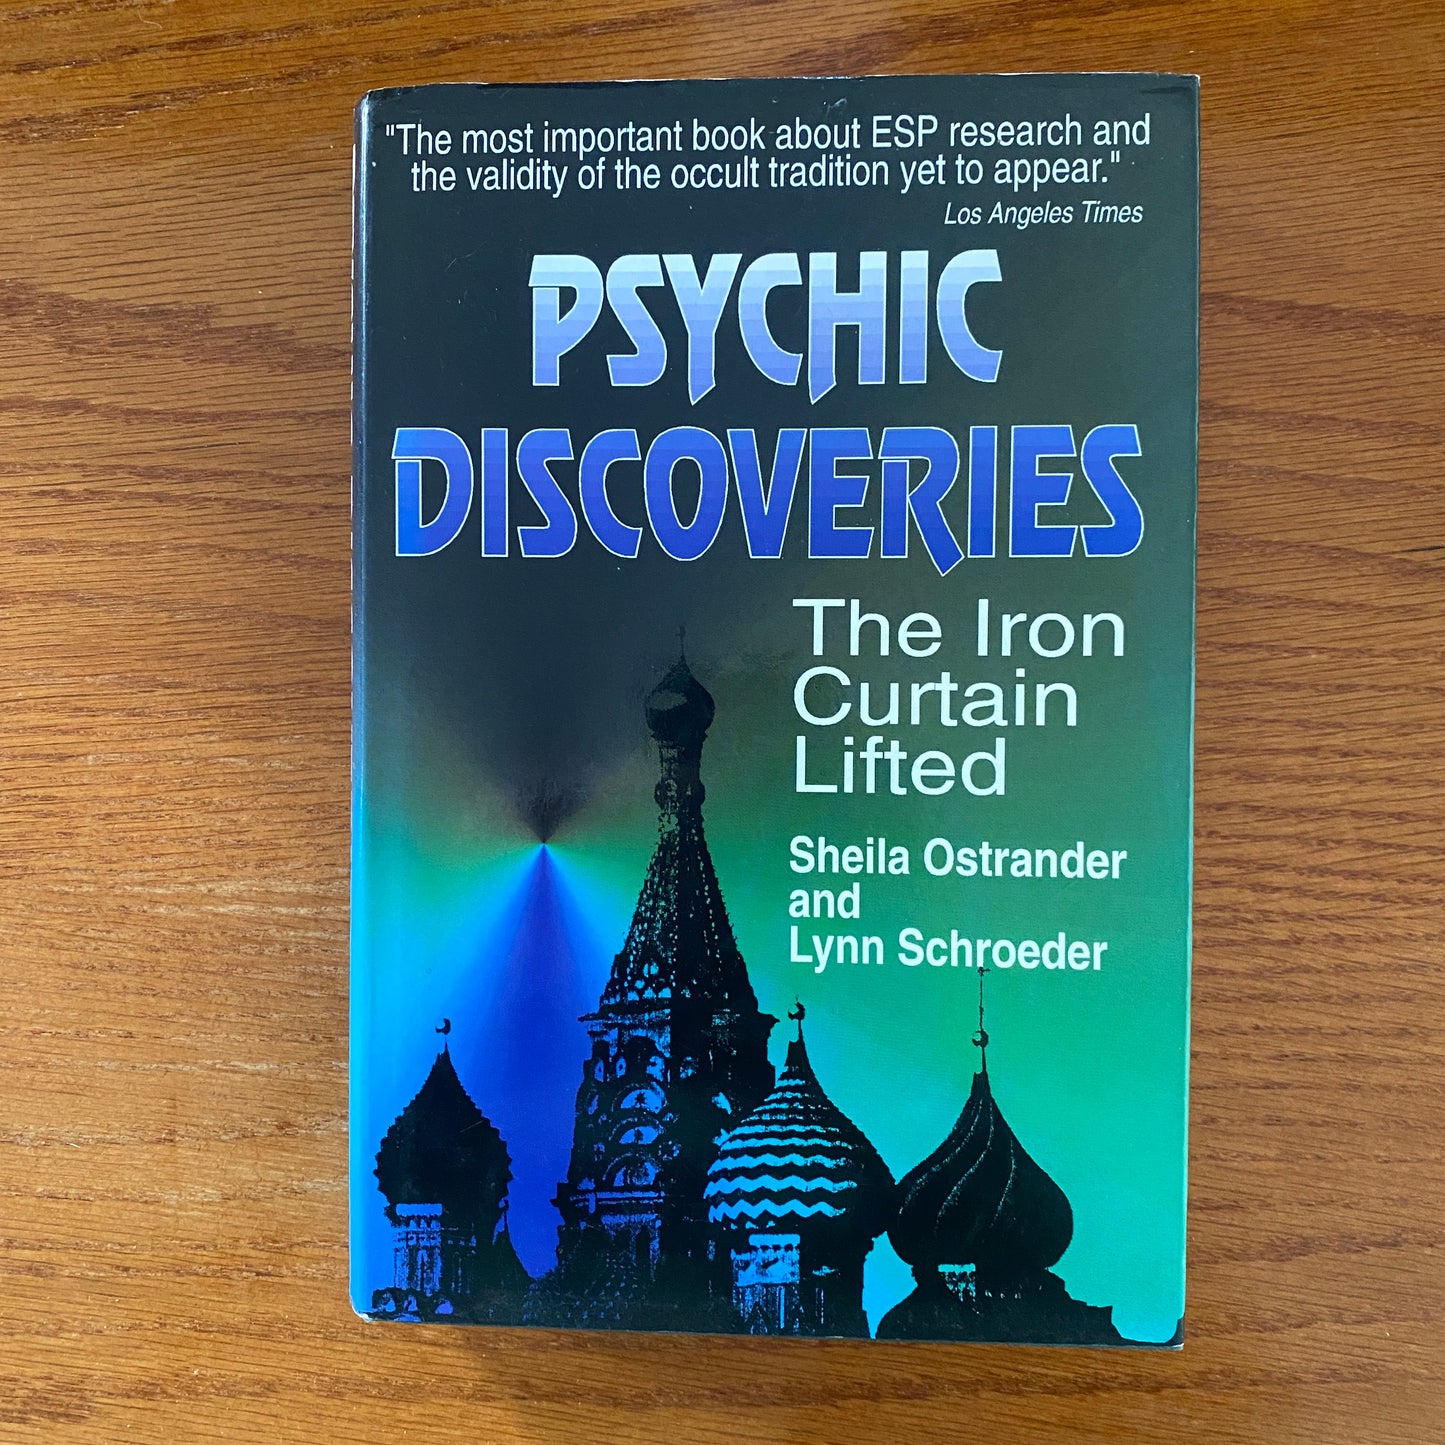 Psychic Discoveries: The Iron Curtain Lifted - Sheila Ostrander & Lynn Schroeder